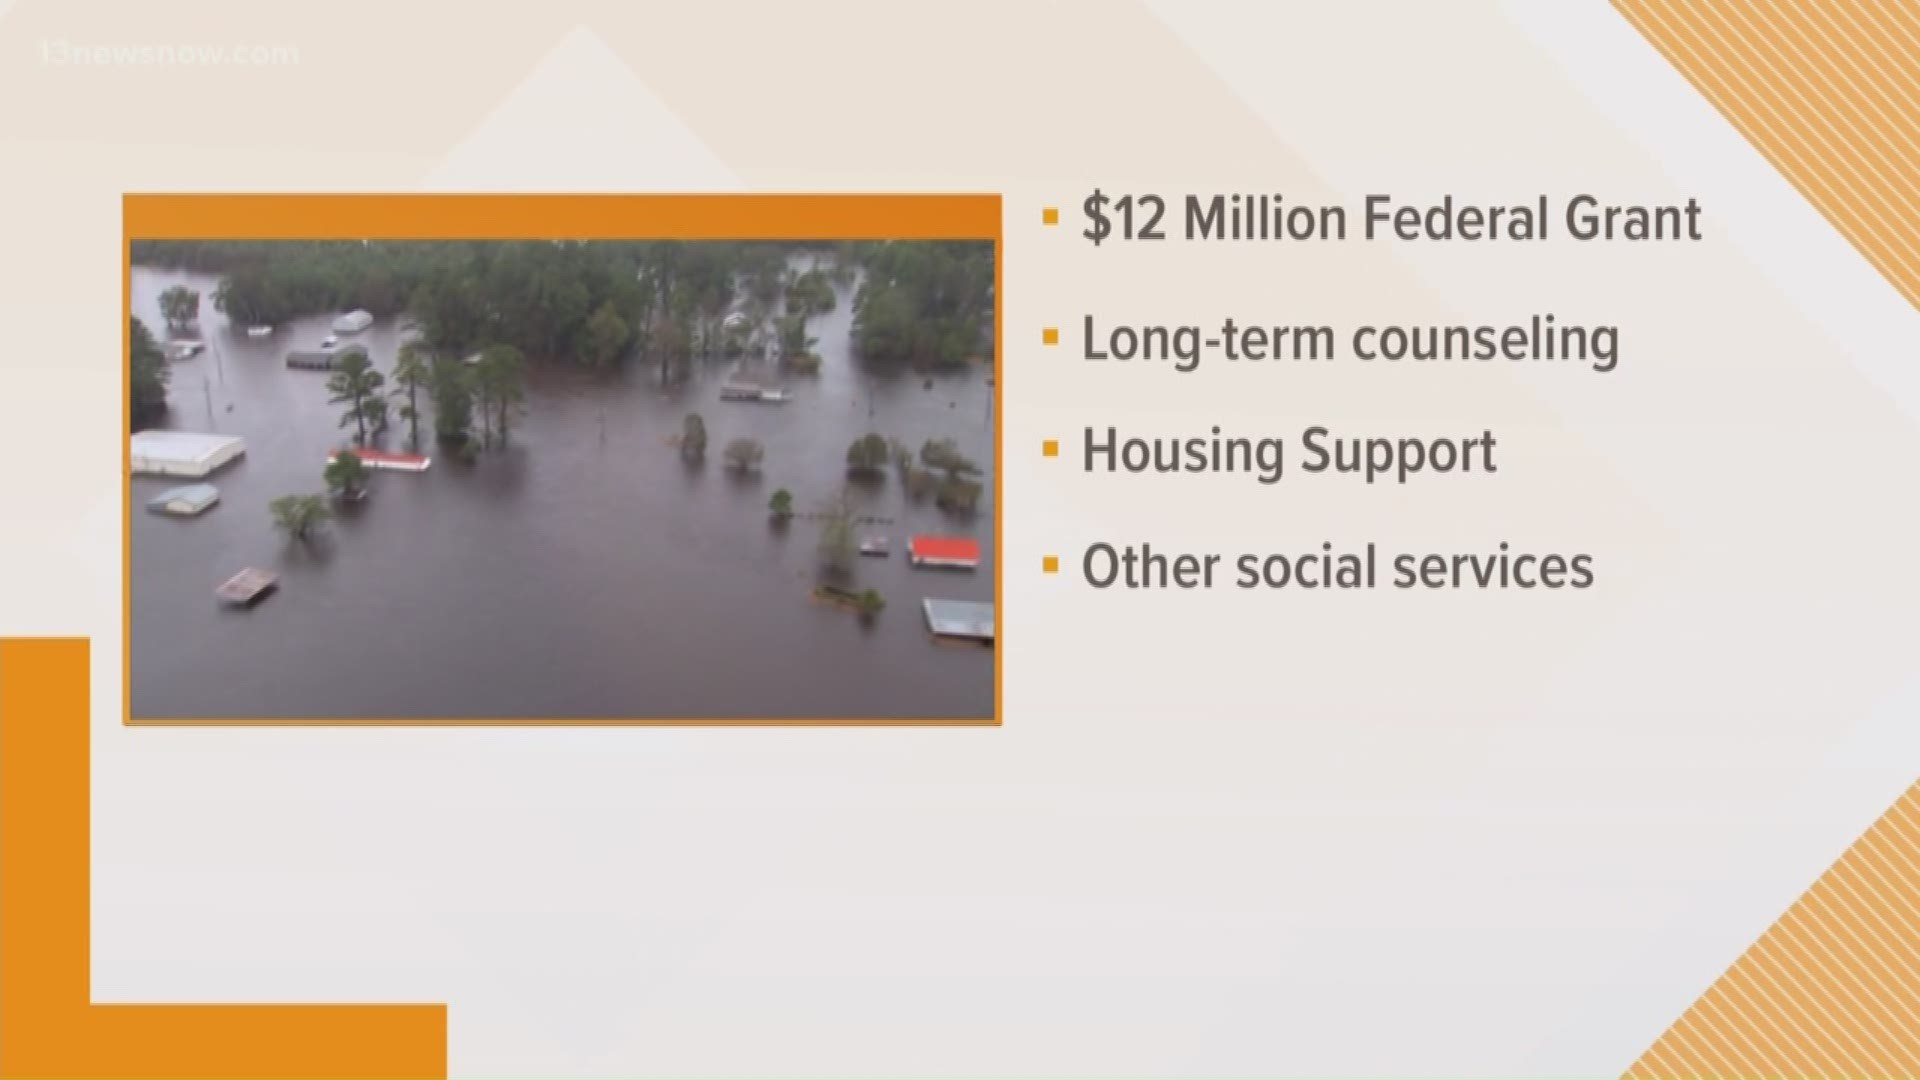 Gov. Roy Cooper has announced that North Carolina will receive a federal grant of more than $12 million to expand crisis counseling services to Hurricane Florence survivors in 28 counties.